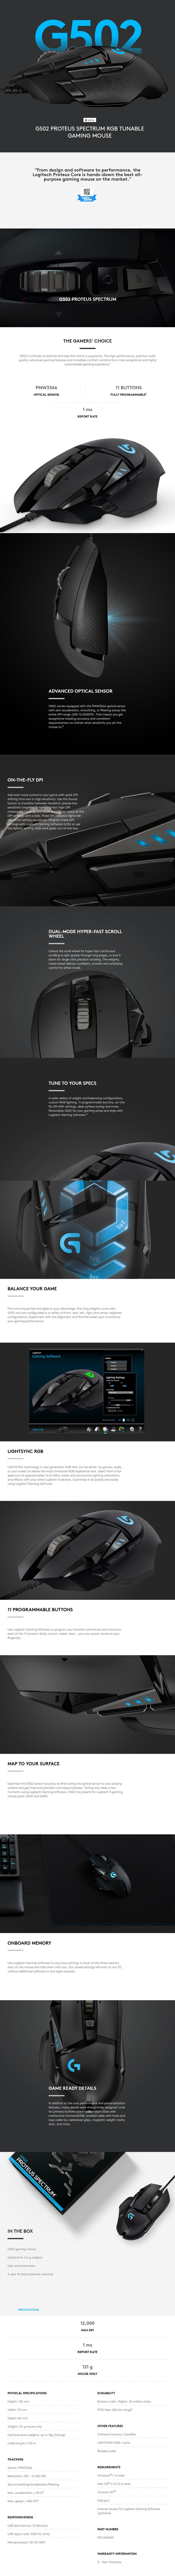 Logitech G502 Proteus Spectrum Tunable RGB Gaming Mouse Display Overview 1